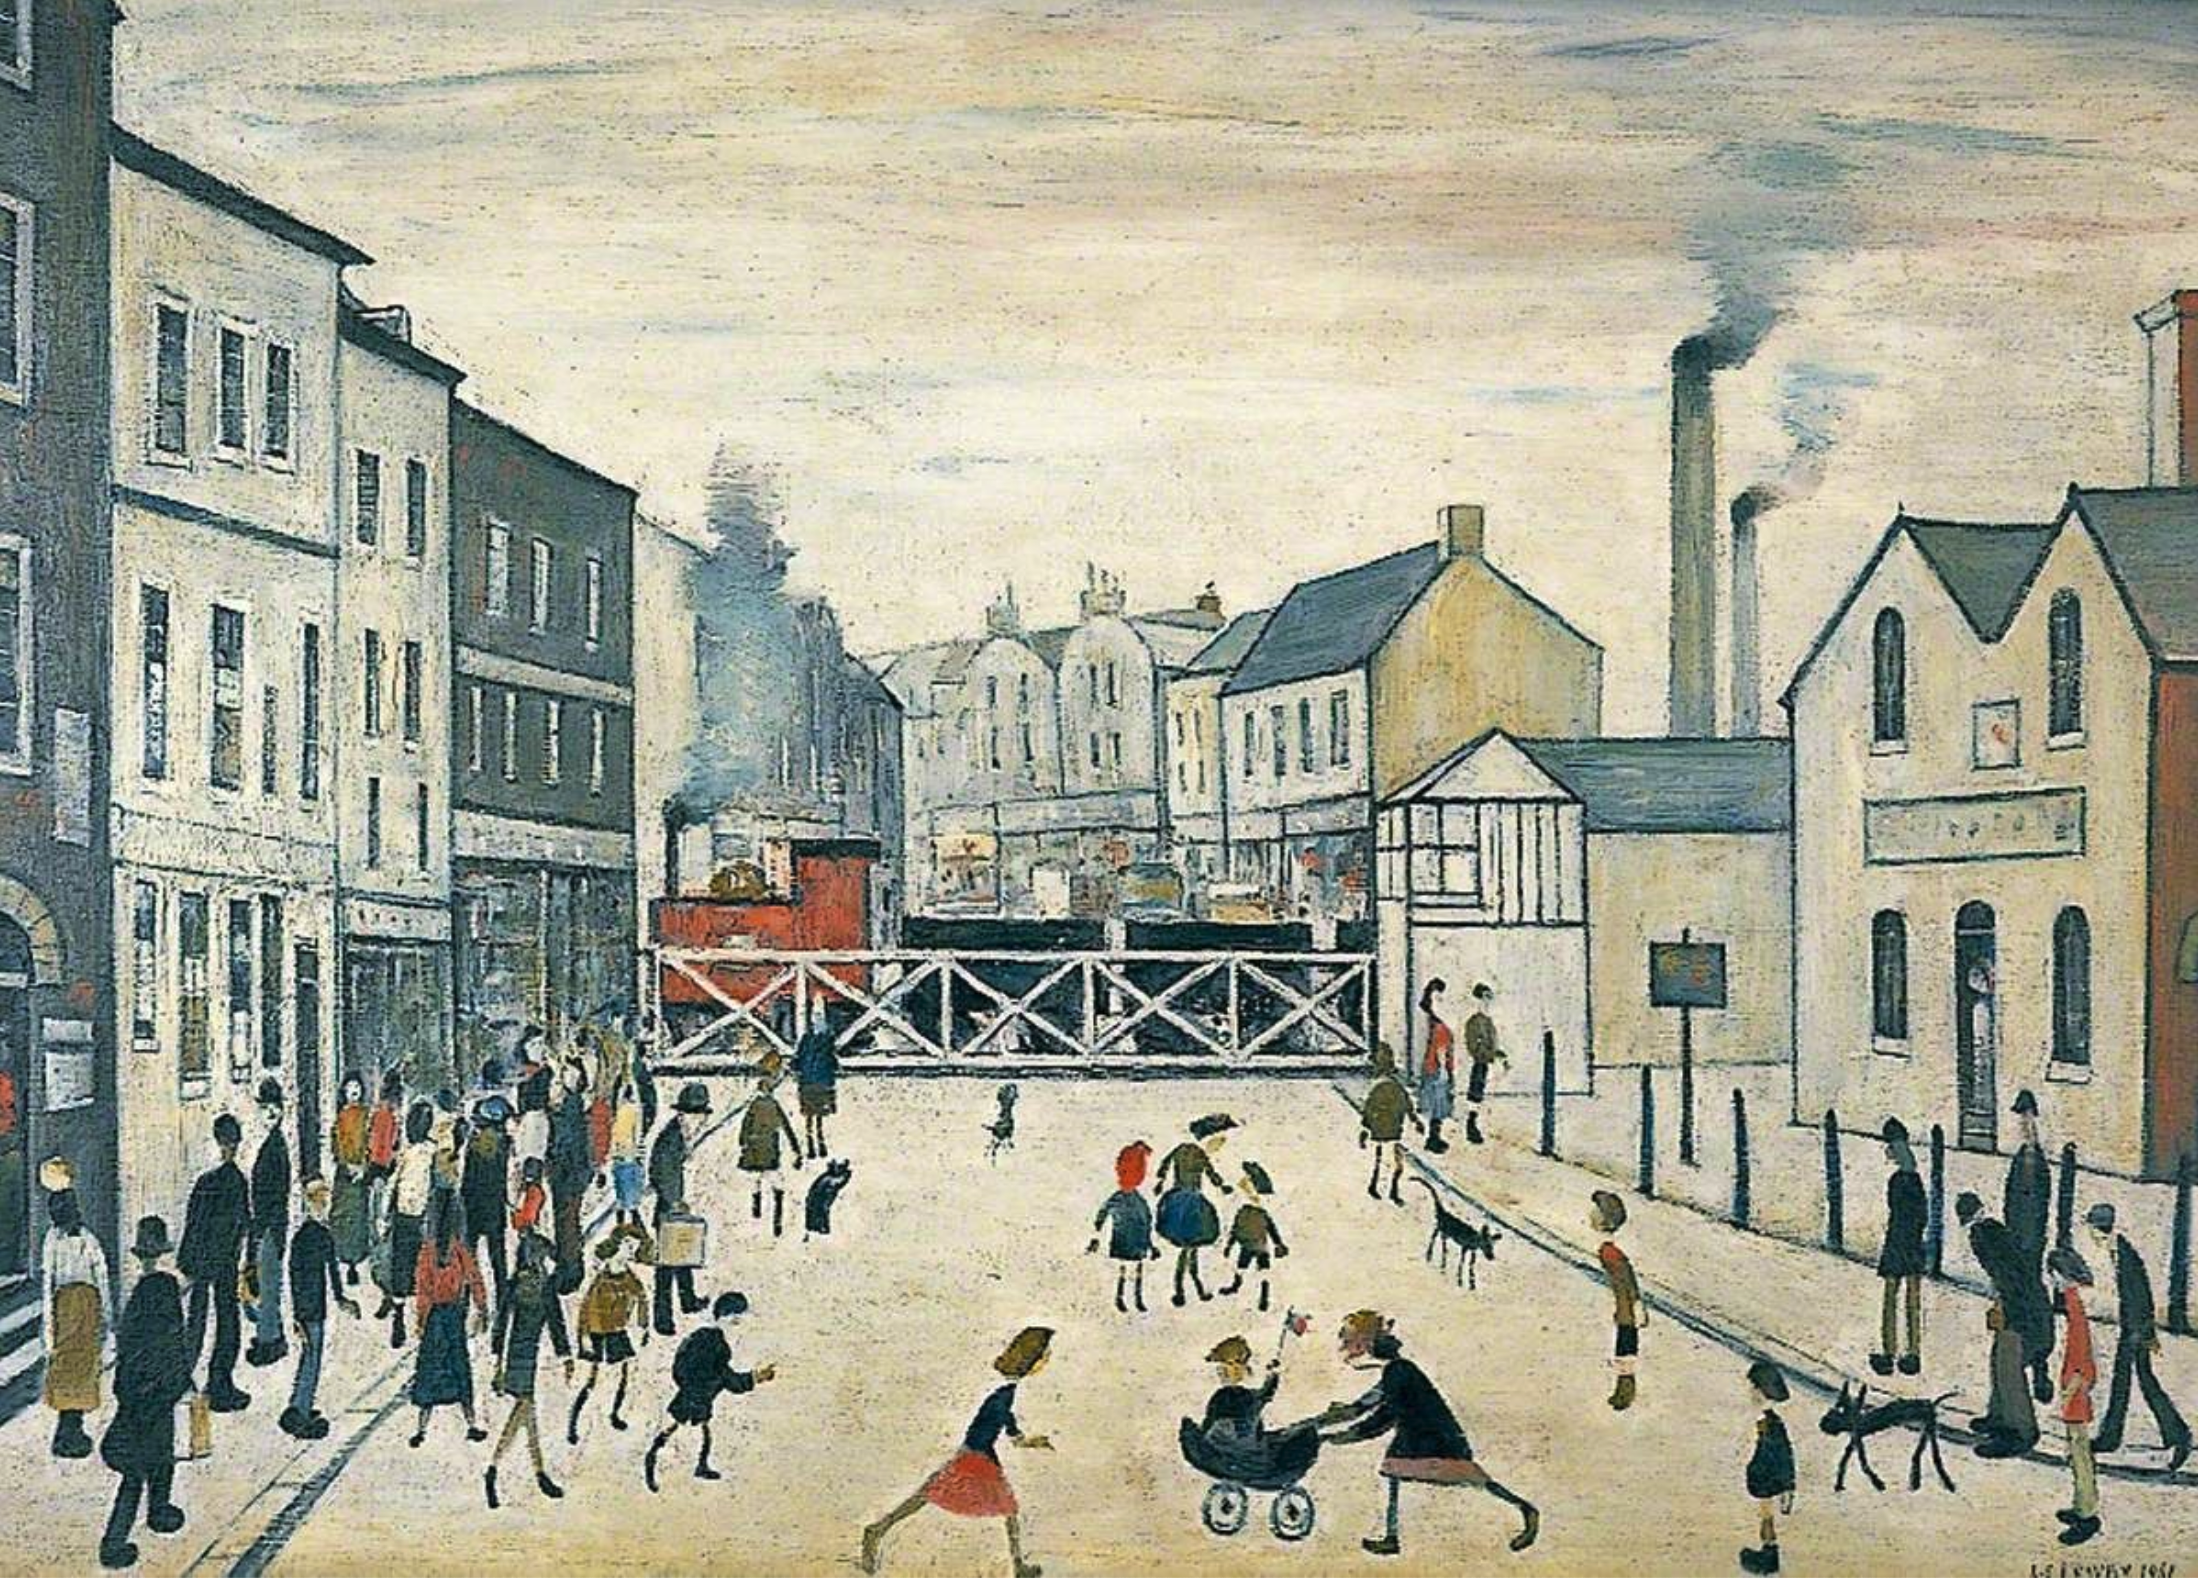 Level Crossing, Burton-upon-Trent (1961) by Laurence Stephen Lowry (1887 - 1976), English artist.